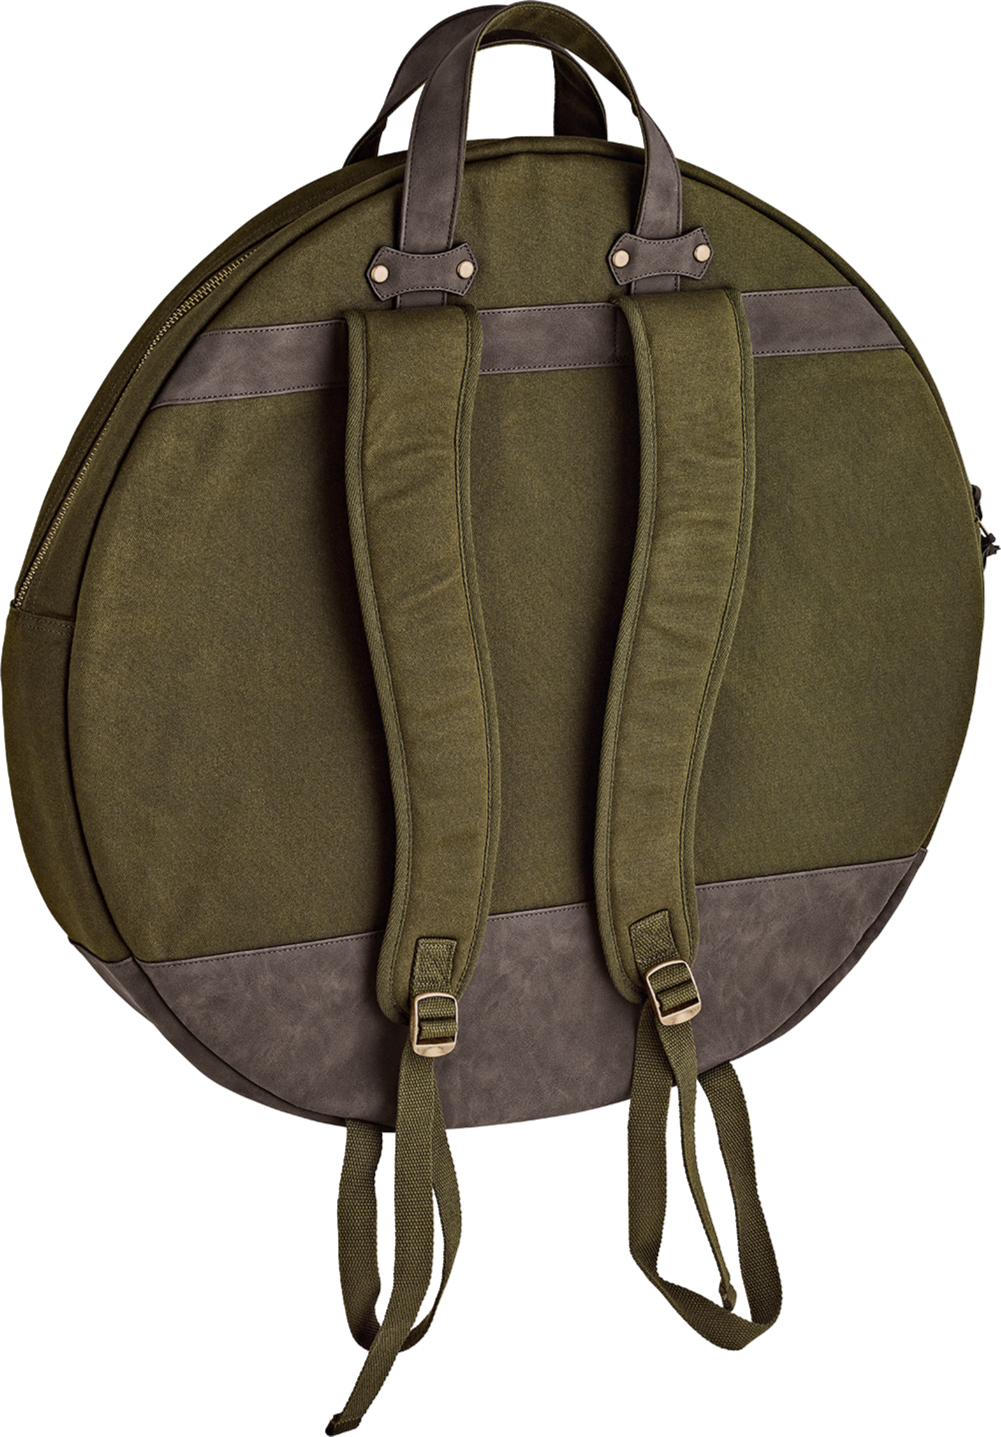 Meinl 22" Canvas Collection Cymbal Bag, Forest Green